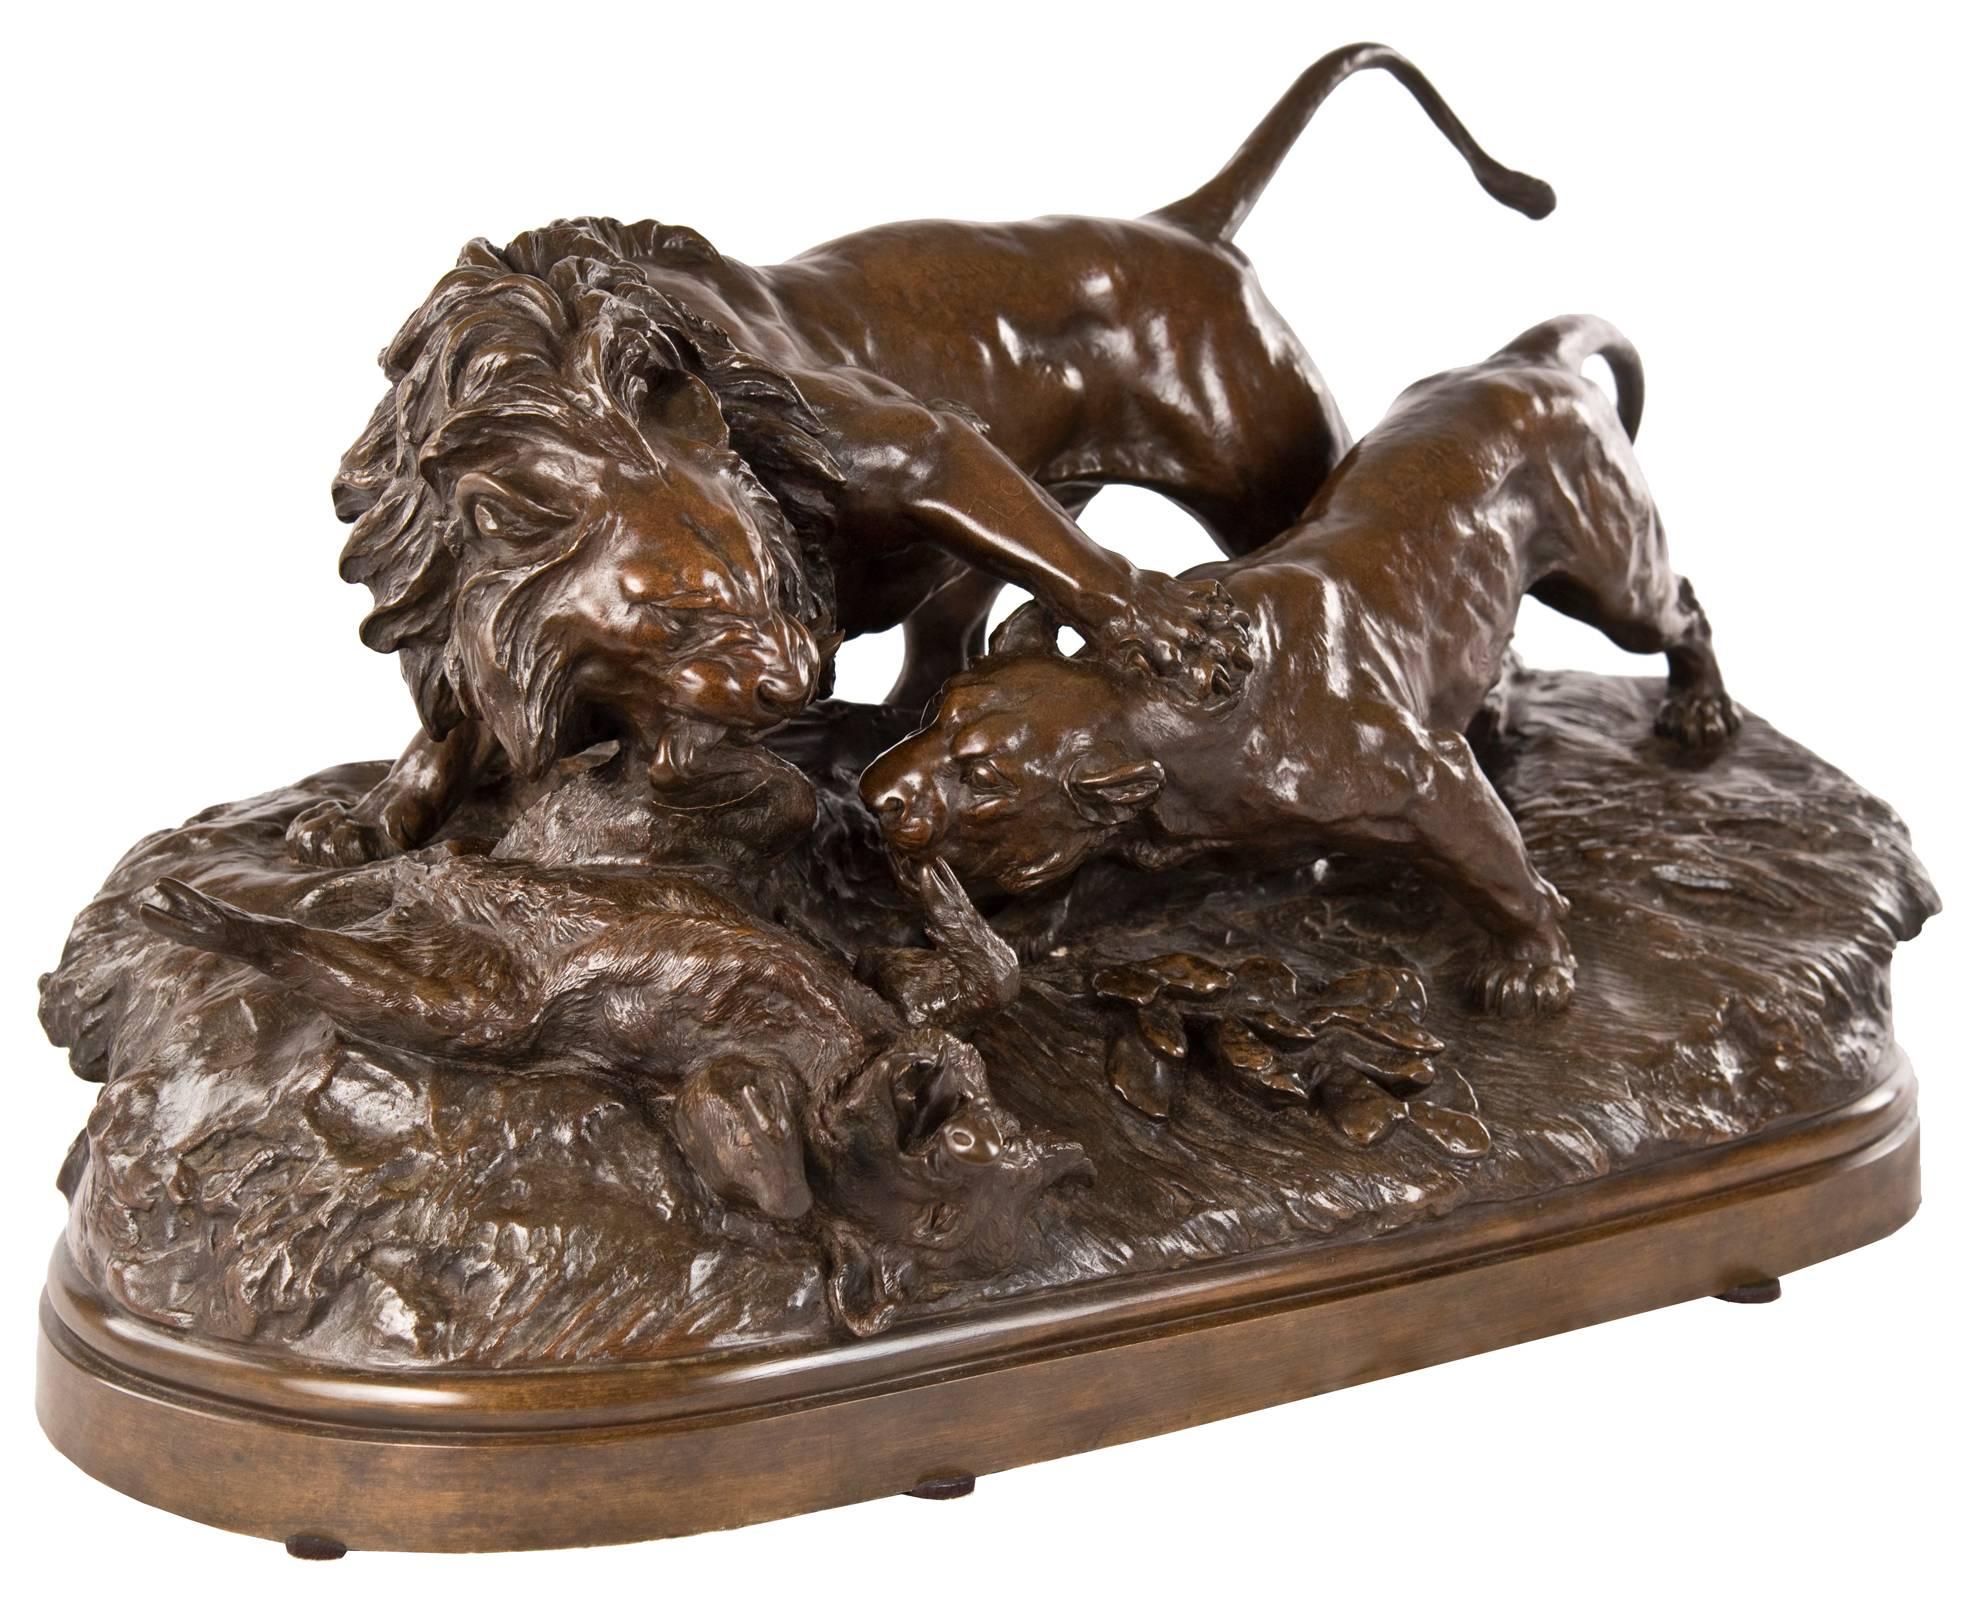 A French 19th century bronze group full of energy and movement depicting a lion and a lioness fighting for a boar, raised on a naturalistic ground atop an oblong stepped base. The lion grips the leg of the boar in his jaw, with his weighty paw on